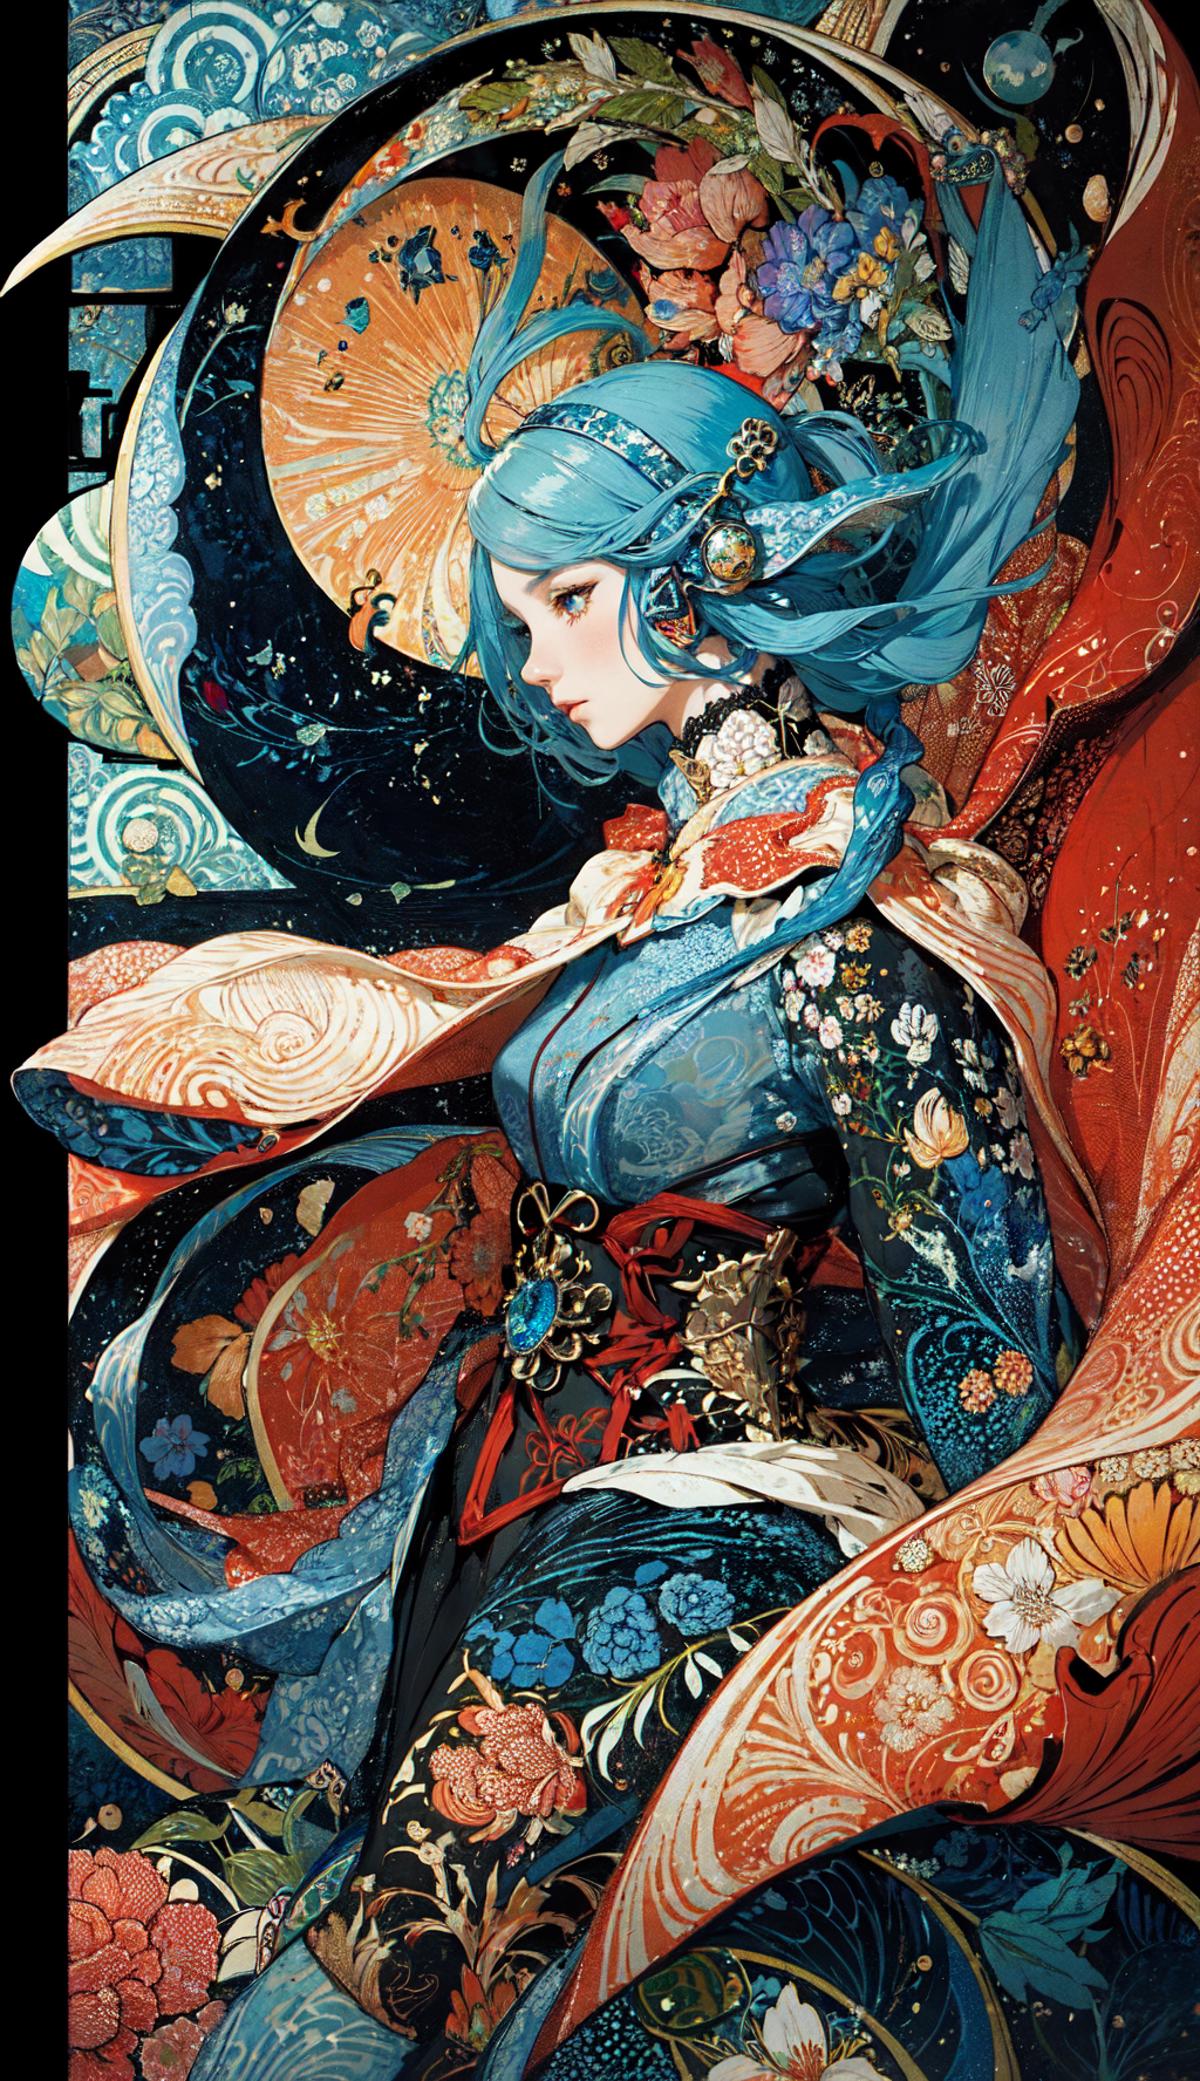 Anime girl with blue hair and a blue dress with flower designs.